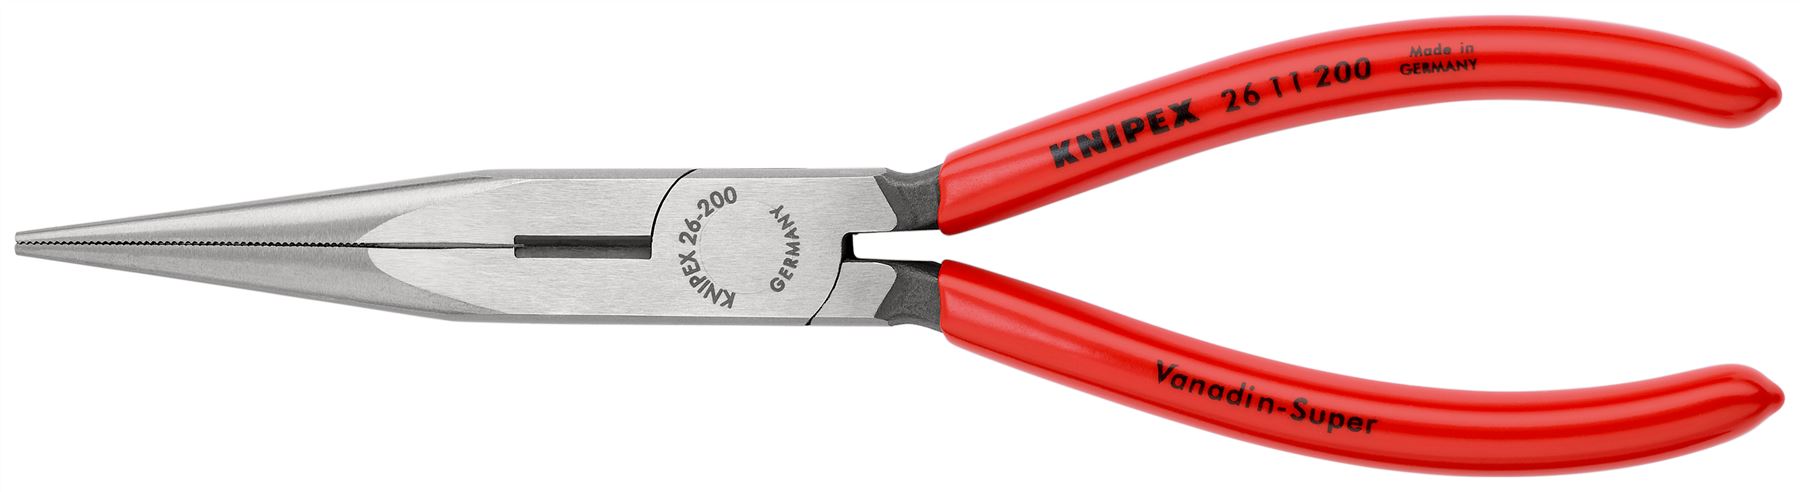 Knipex Snipe Nose Side Cutting Pliers 200mm 26 11 200